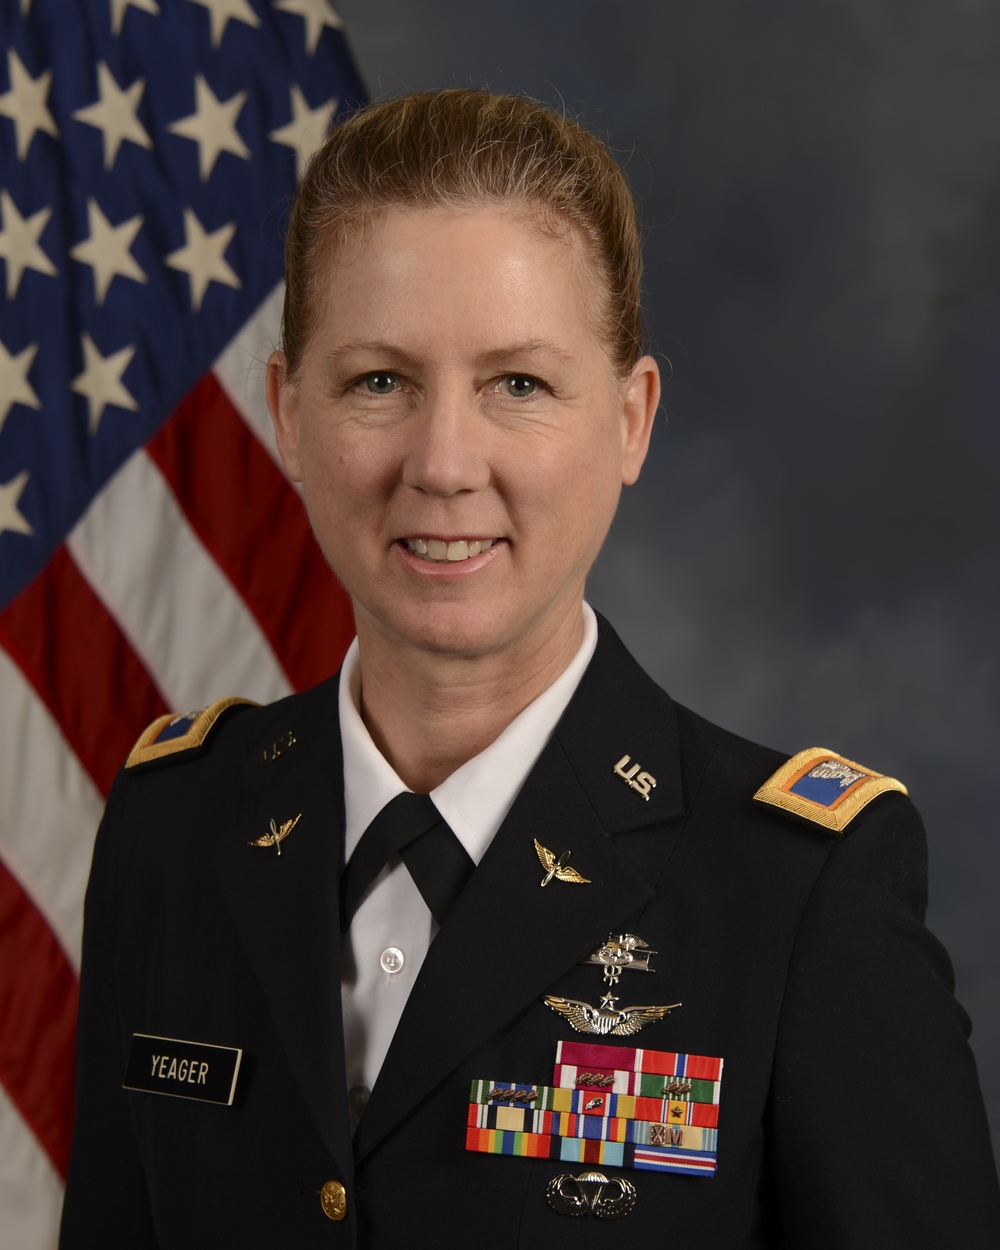 Cal Guard aviator promoted to general